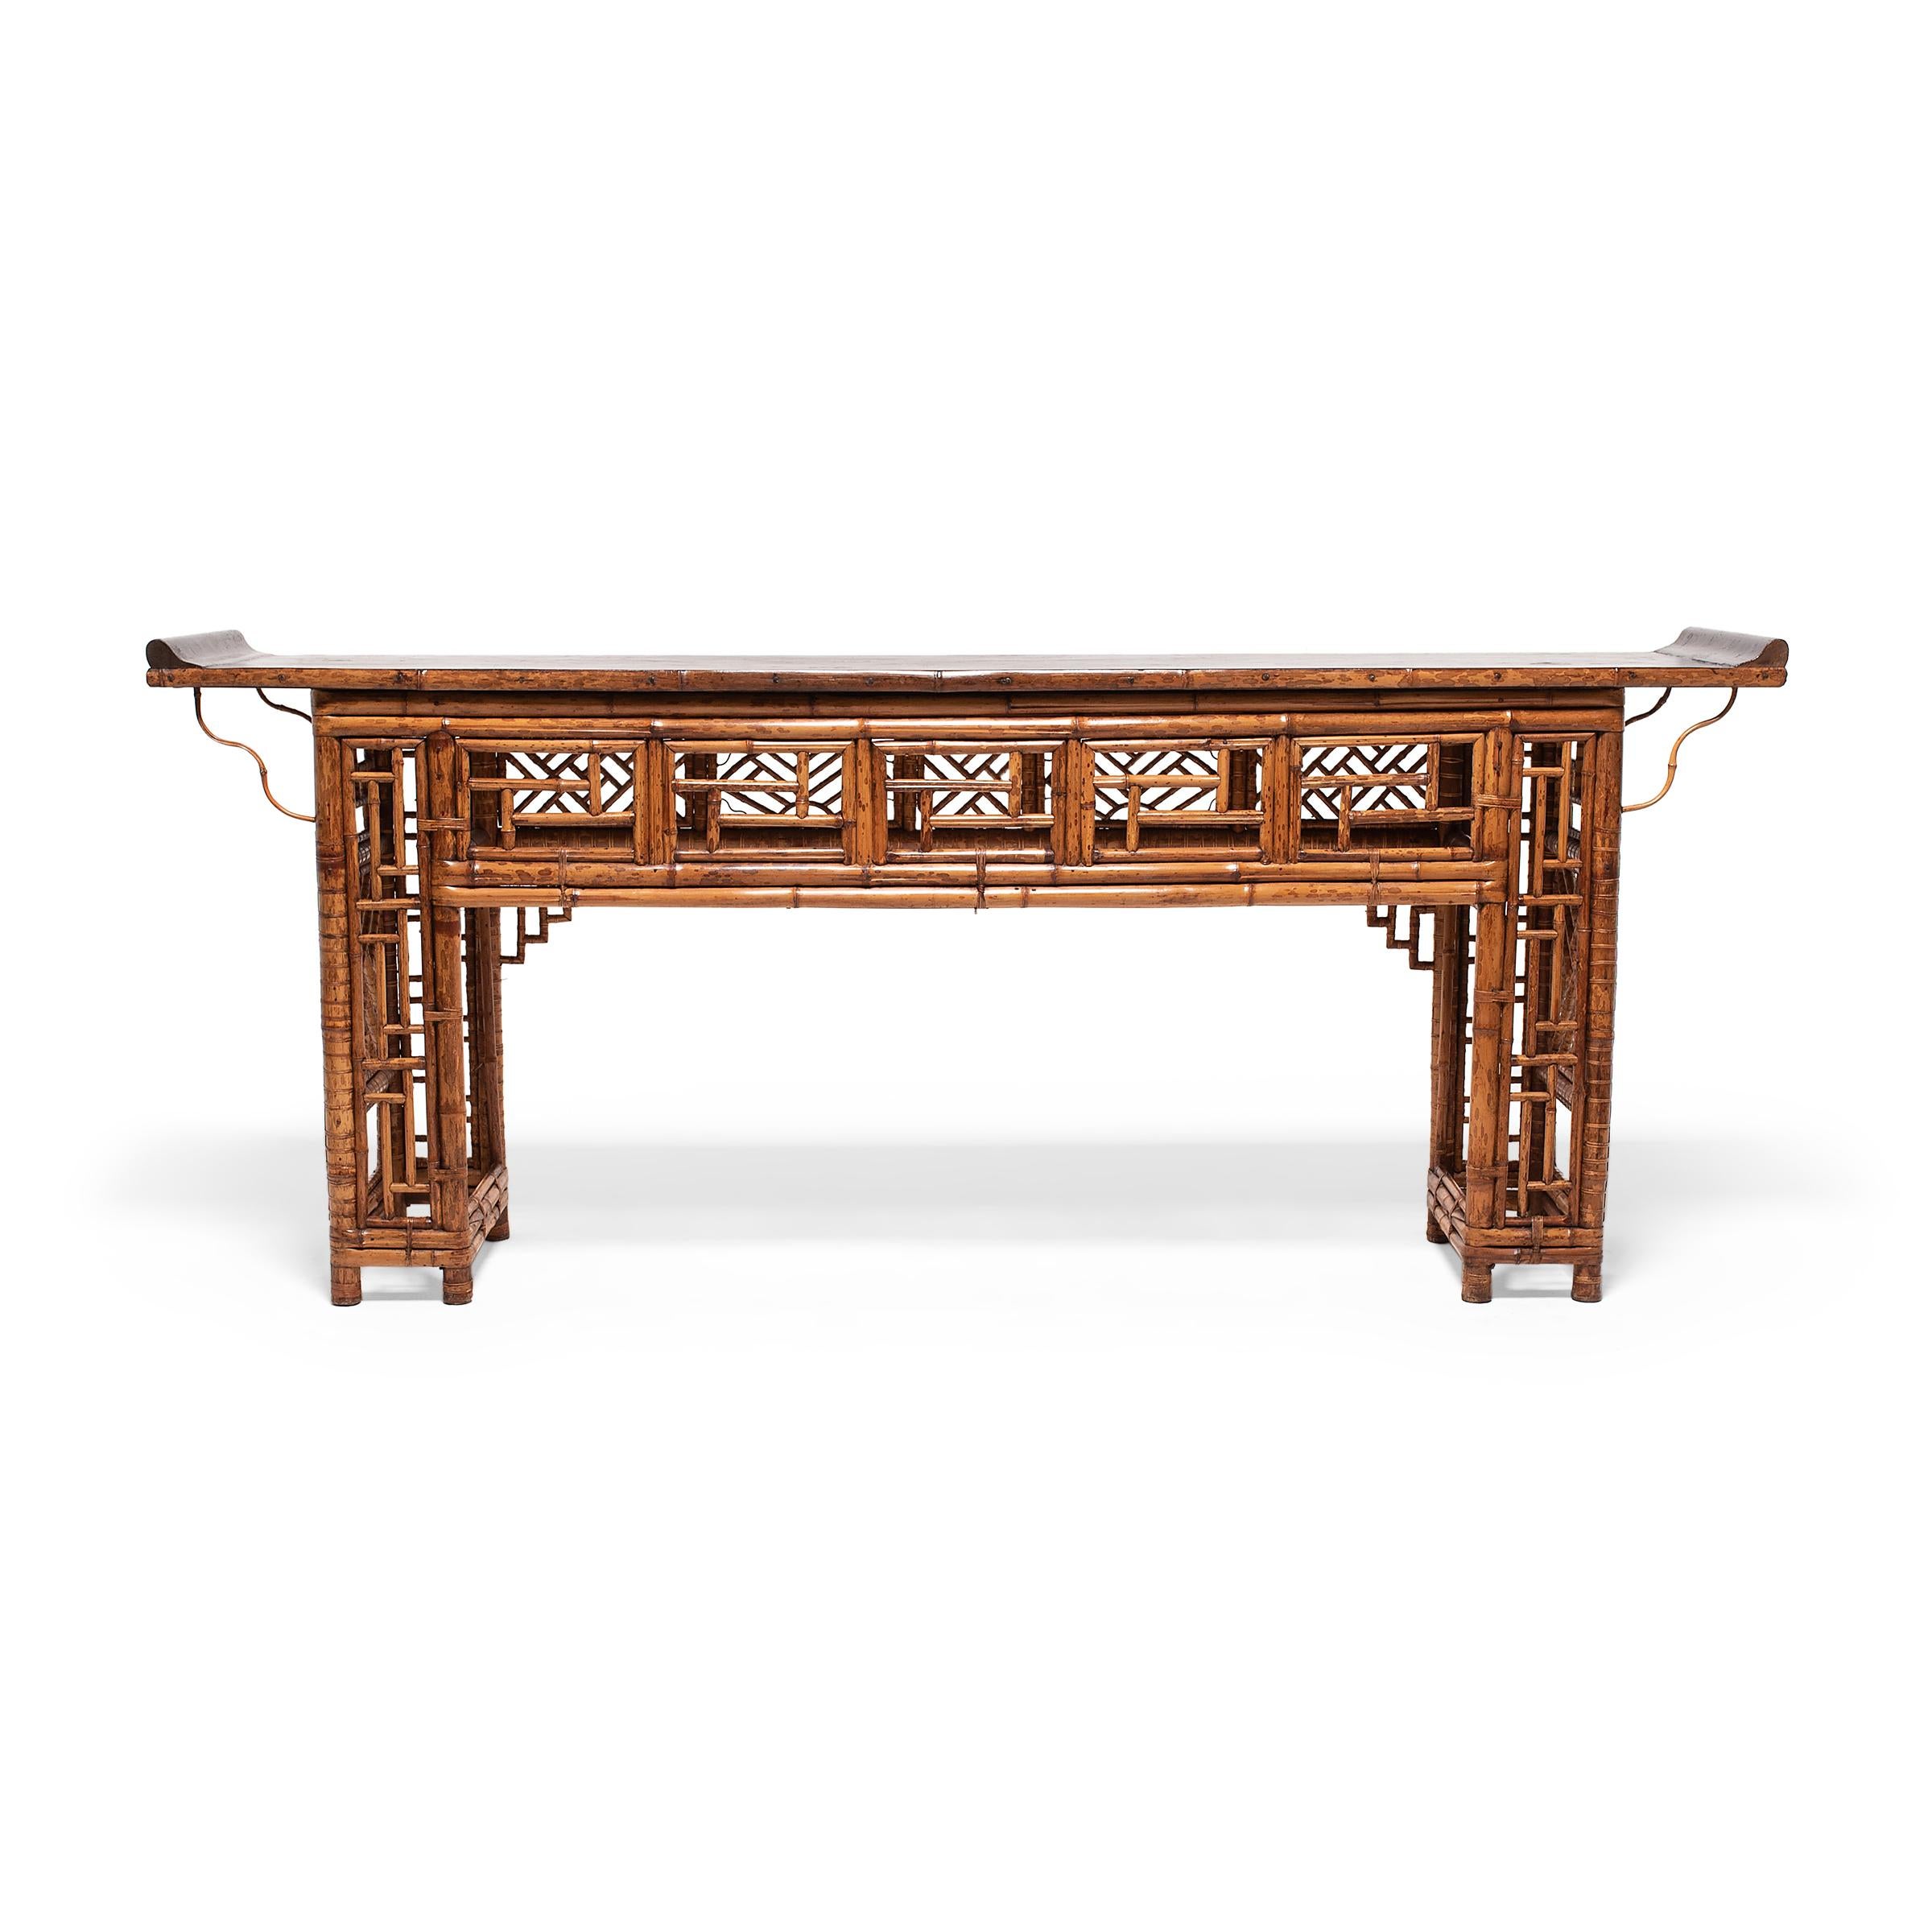 Lacquered Chinese Spotted Bamboo Altar Table, C. 1850